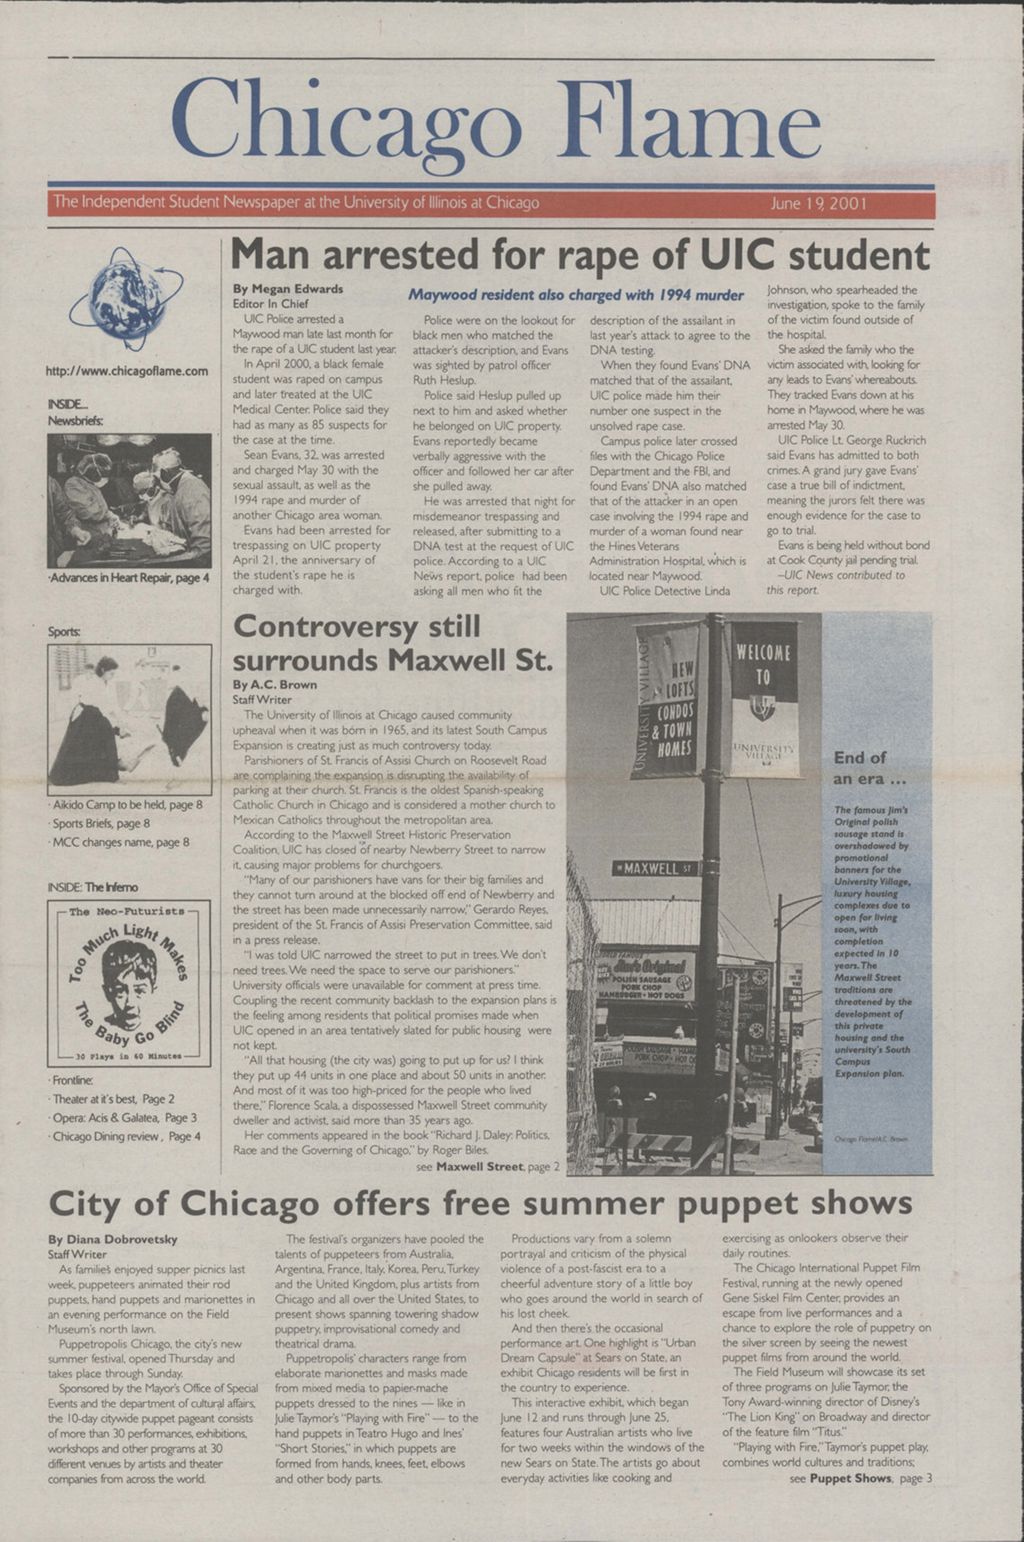 Miniature of Chicago Flame (June 19, 2001)